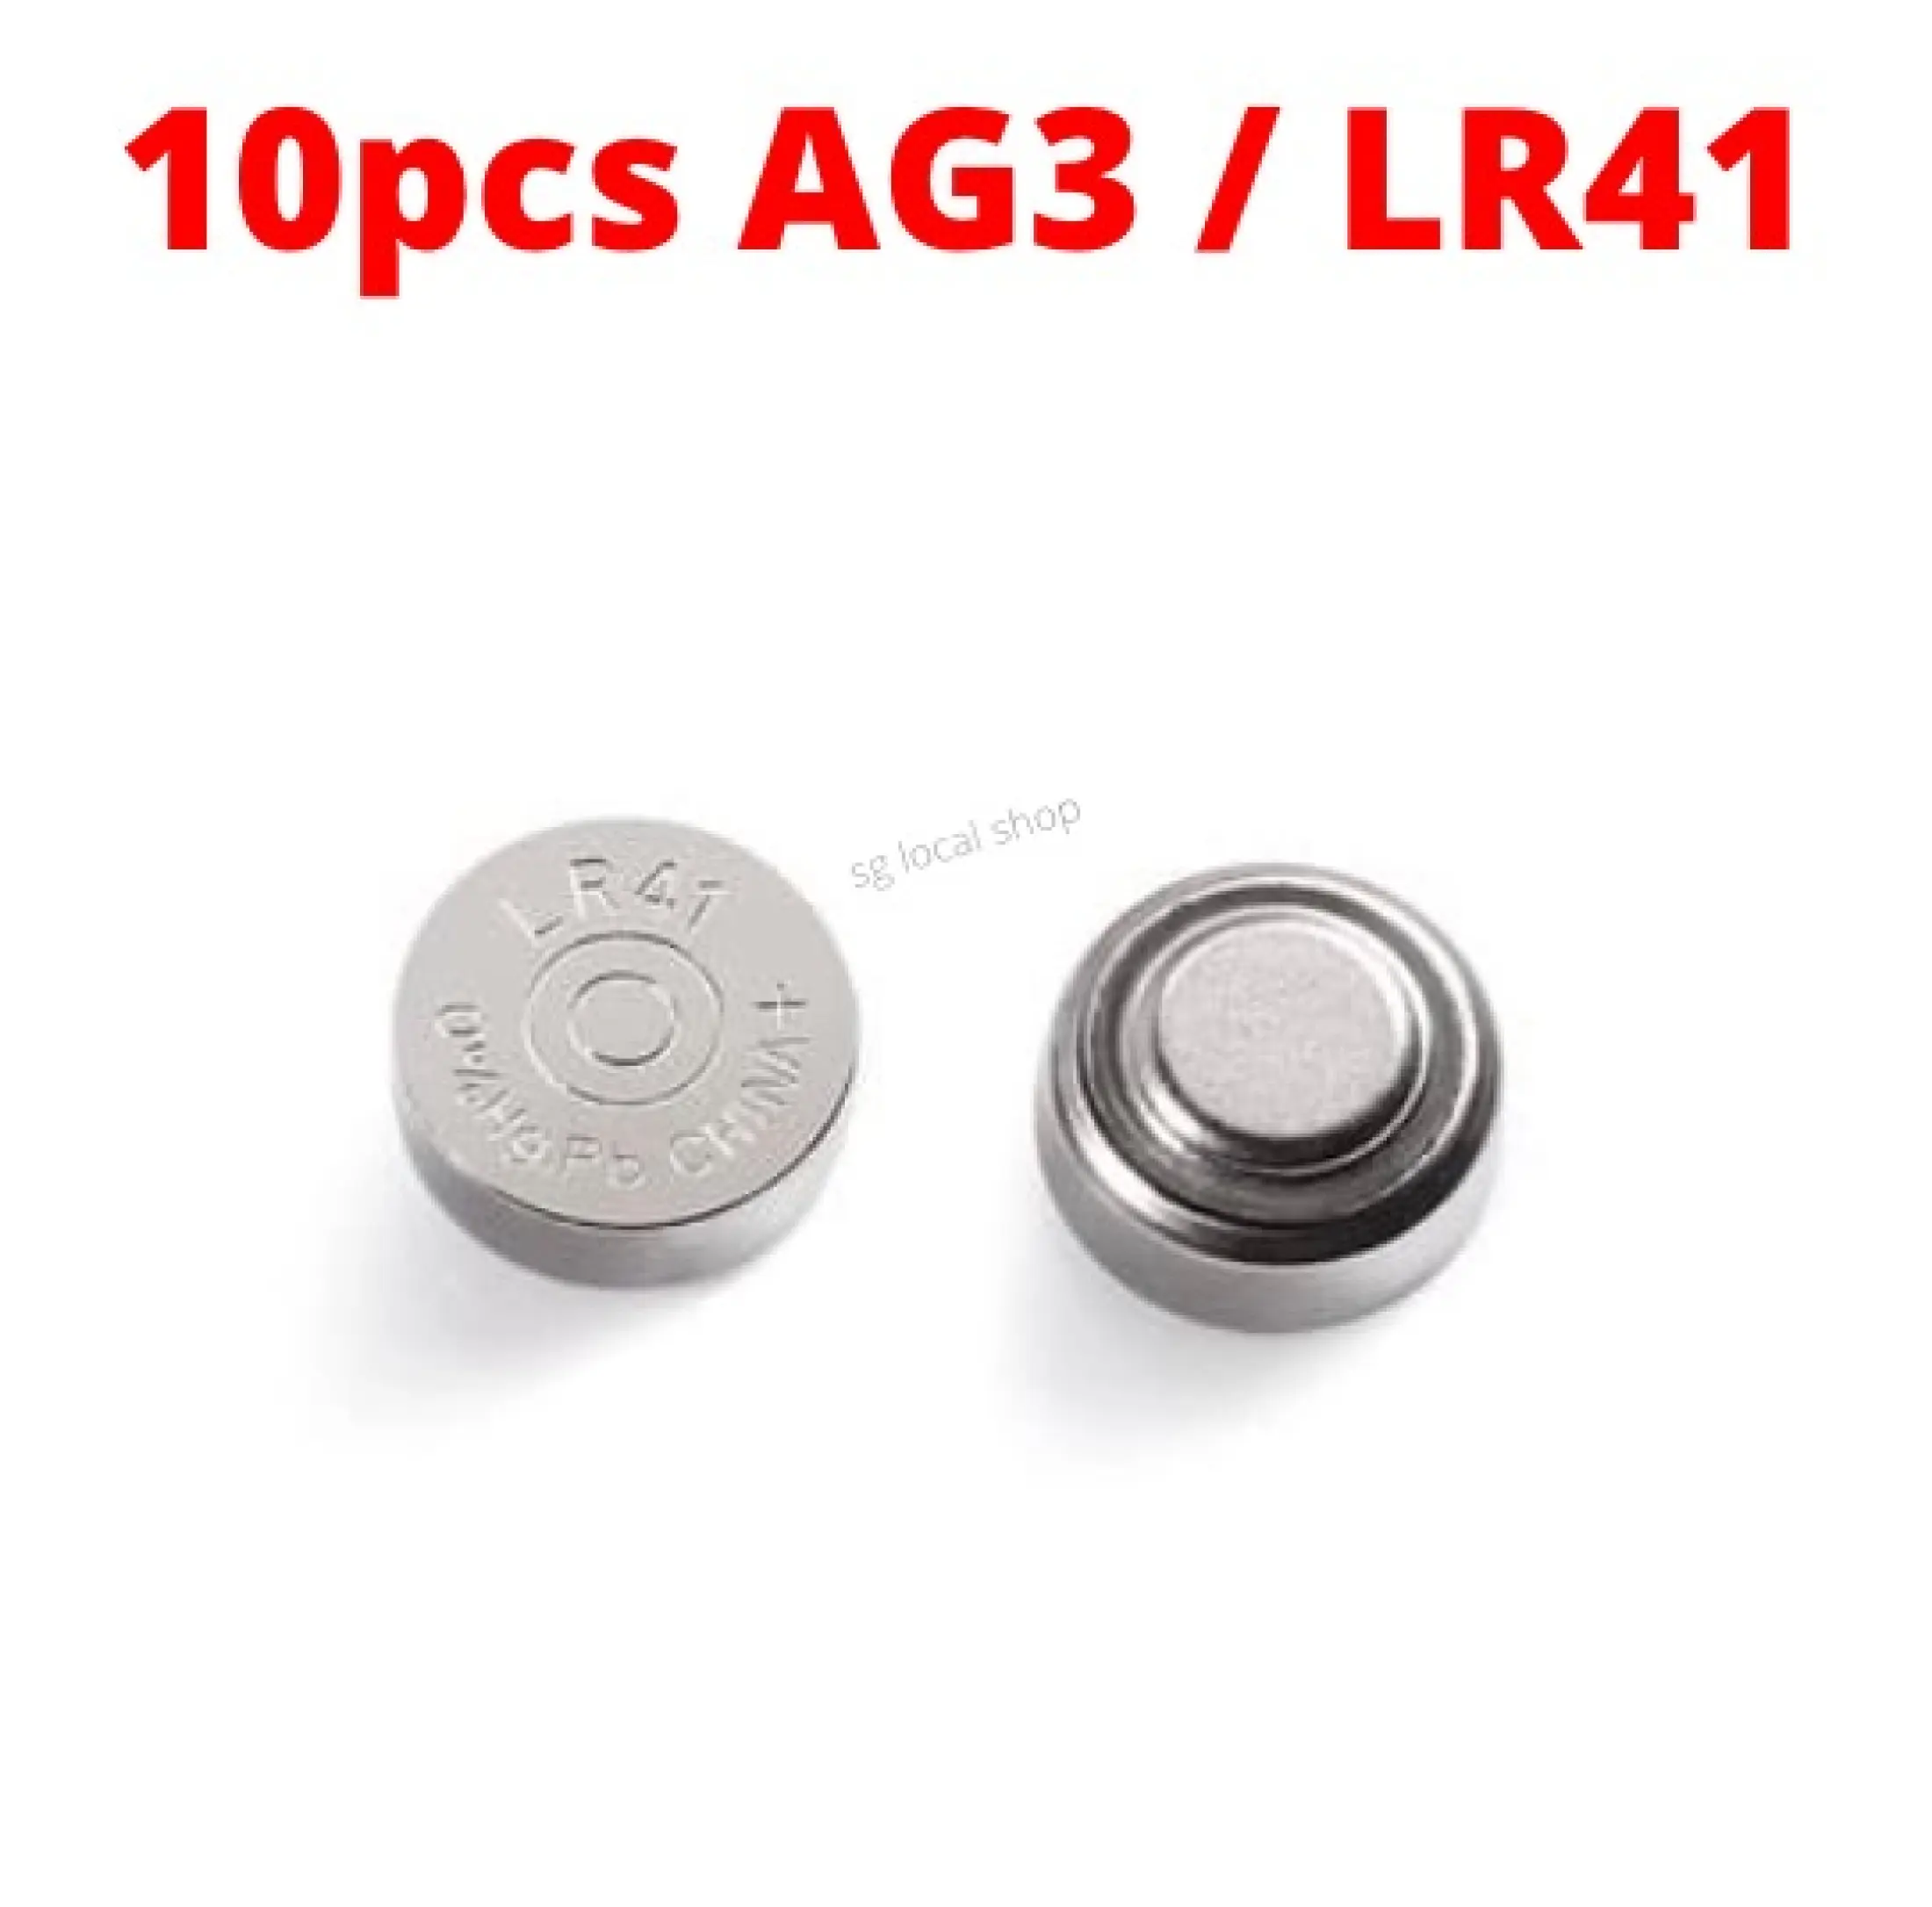 Sg In Stock 10pcs Ag3 Lr41 192 A63 384 1 5v Cell Coin Button Battery For Calculator Watch Thermometer Toys Etc Lazada Singapore